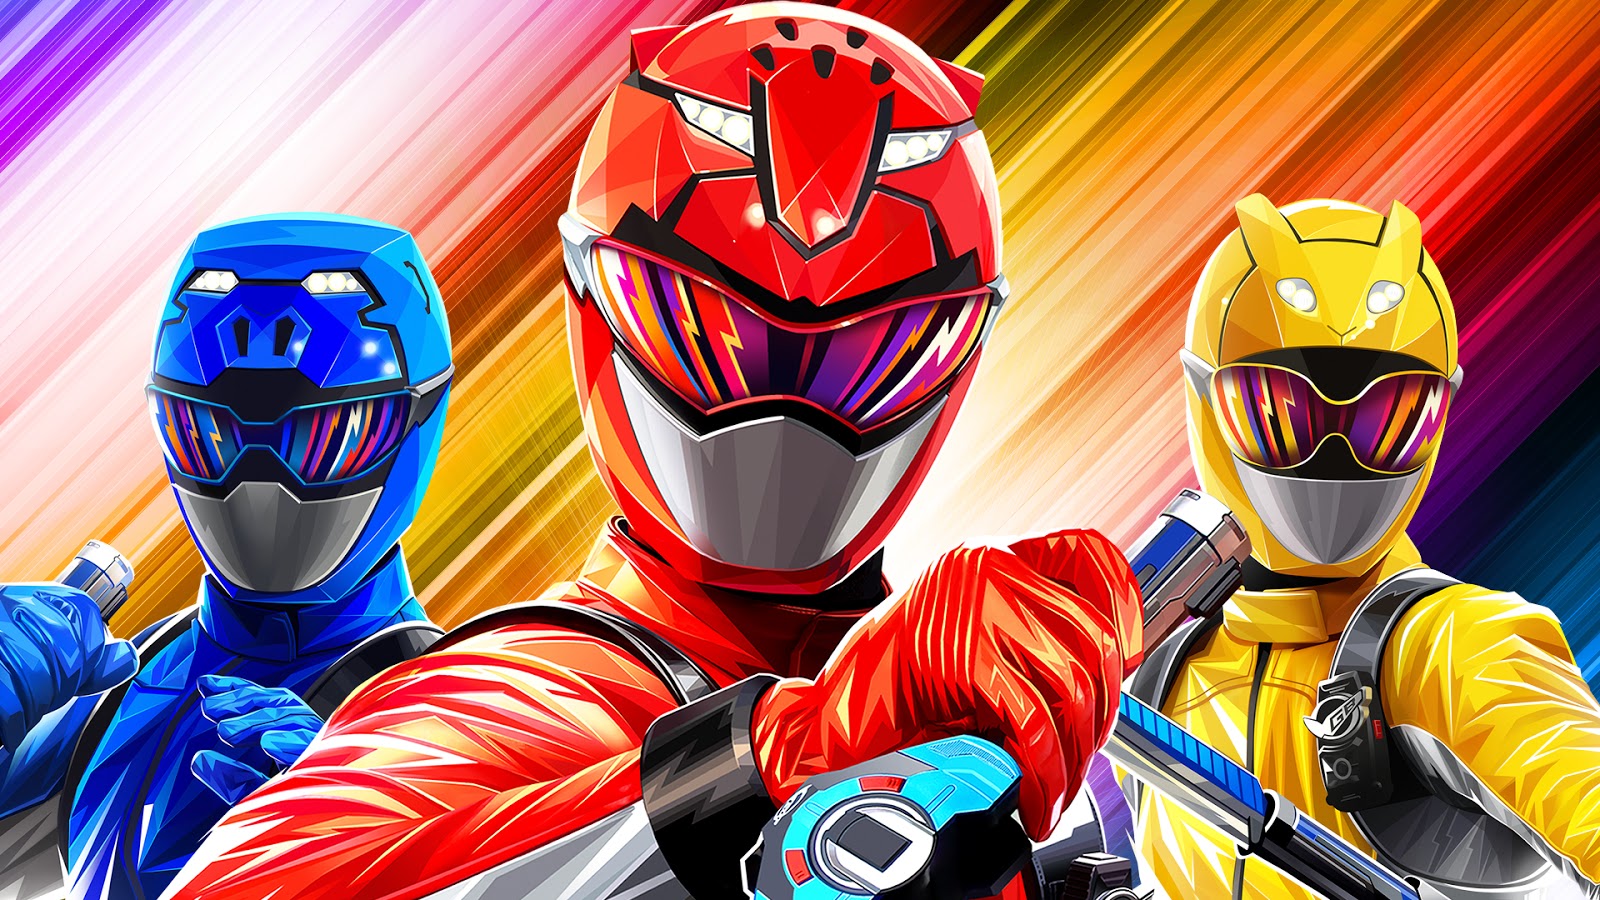 Unmasking 30 Years of Adventure: Why Today's National Power Rangers Day is a Big Deal